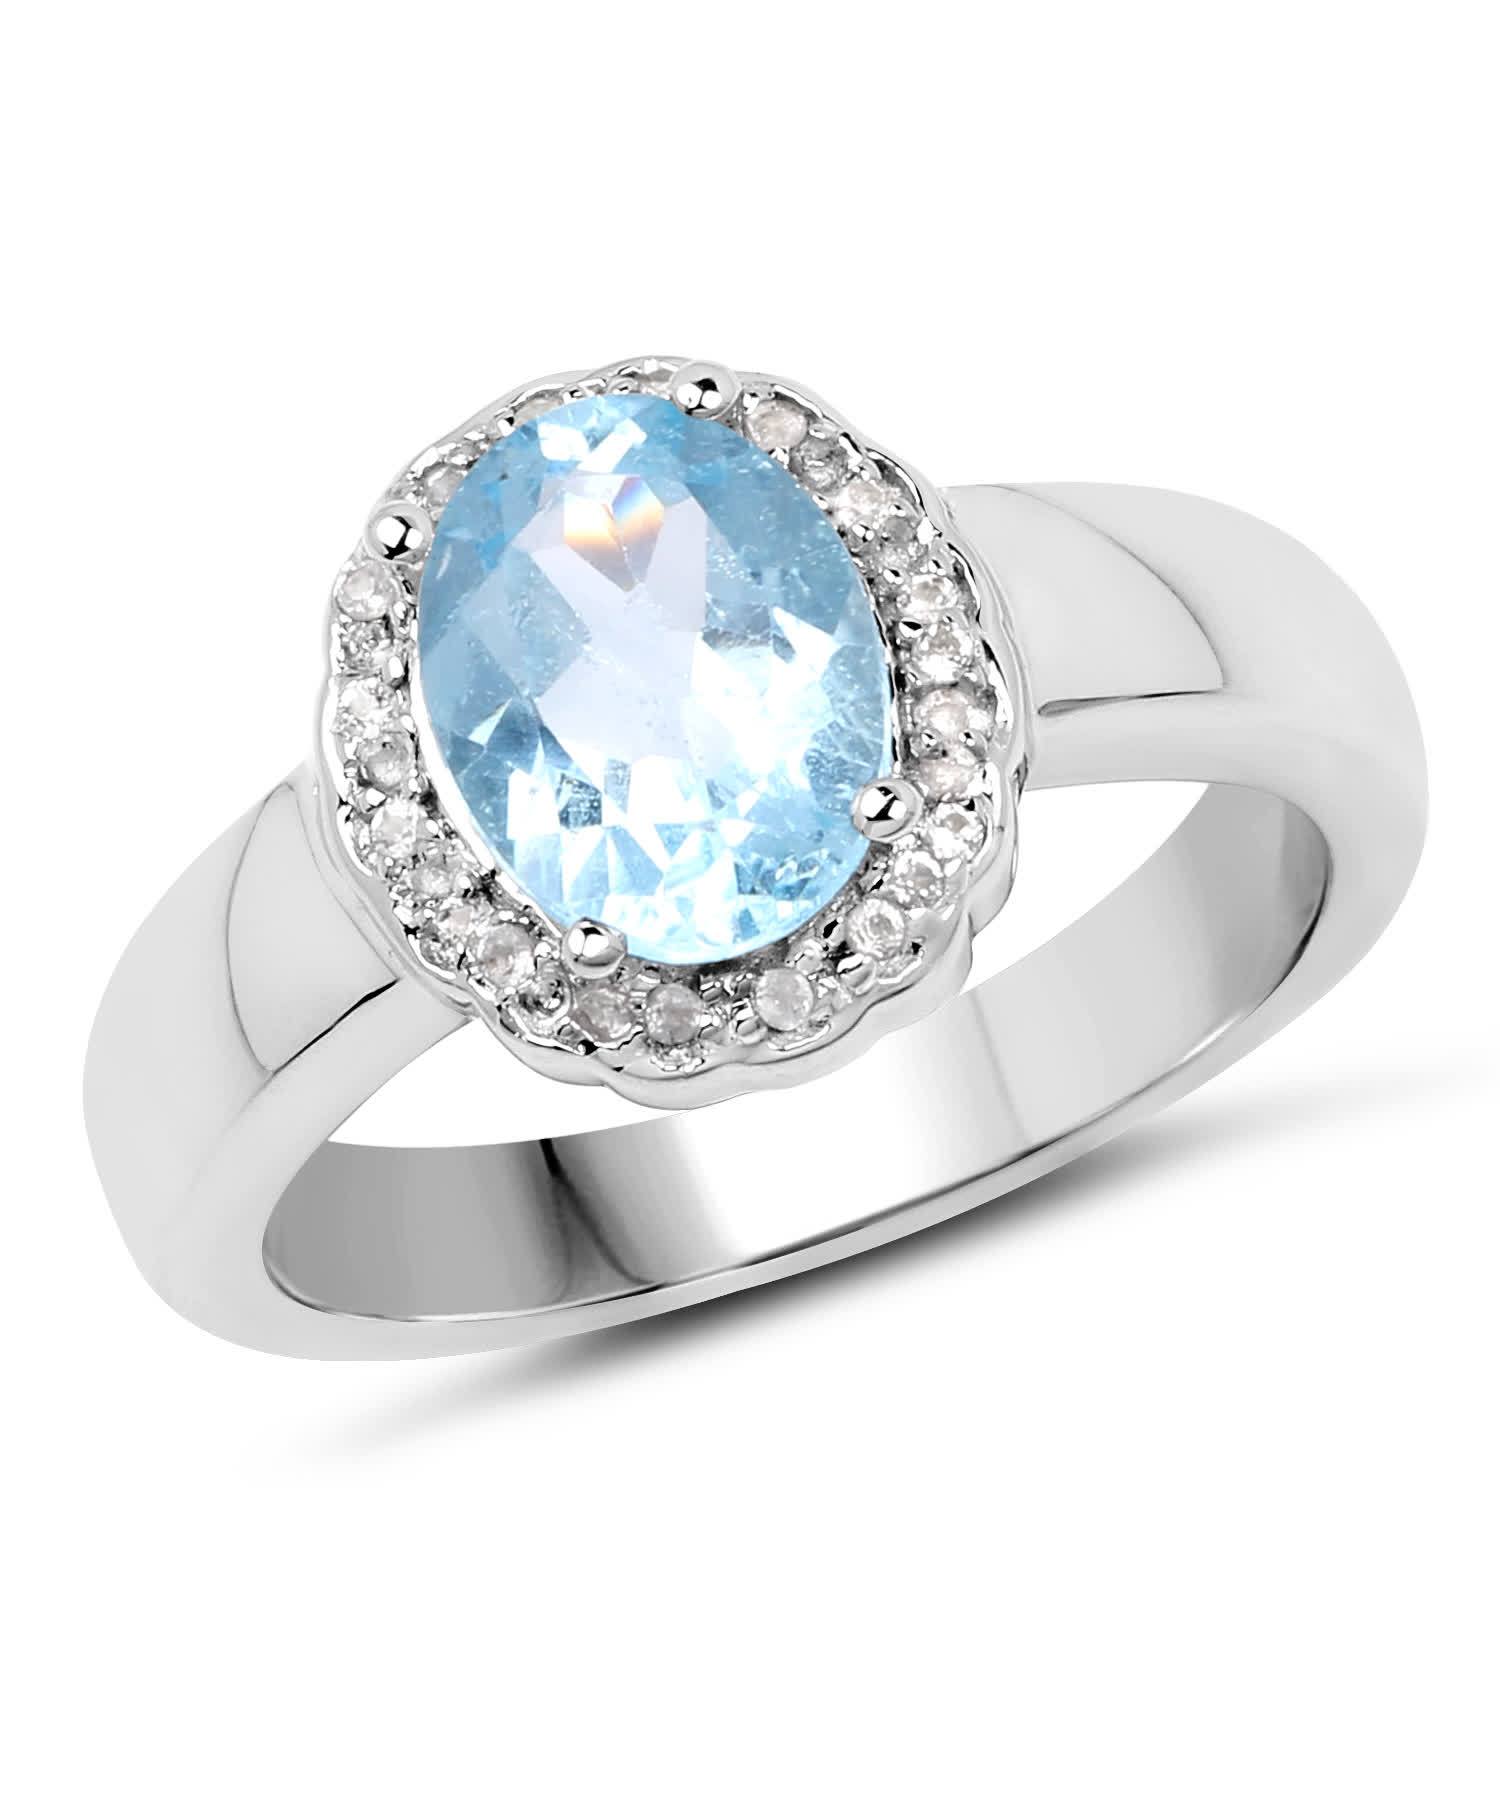 2.58ctw Natural Sky Blue Topaz Rhodium Plated 925 Sterling Silver Ring View 1